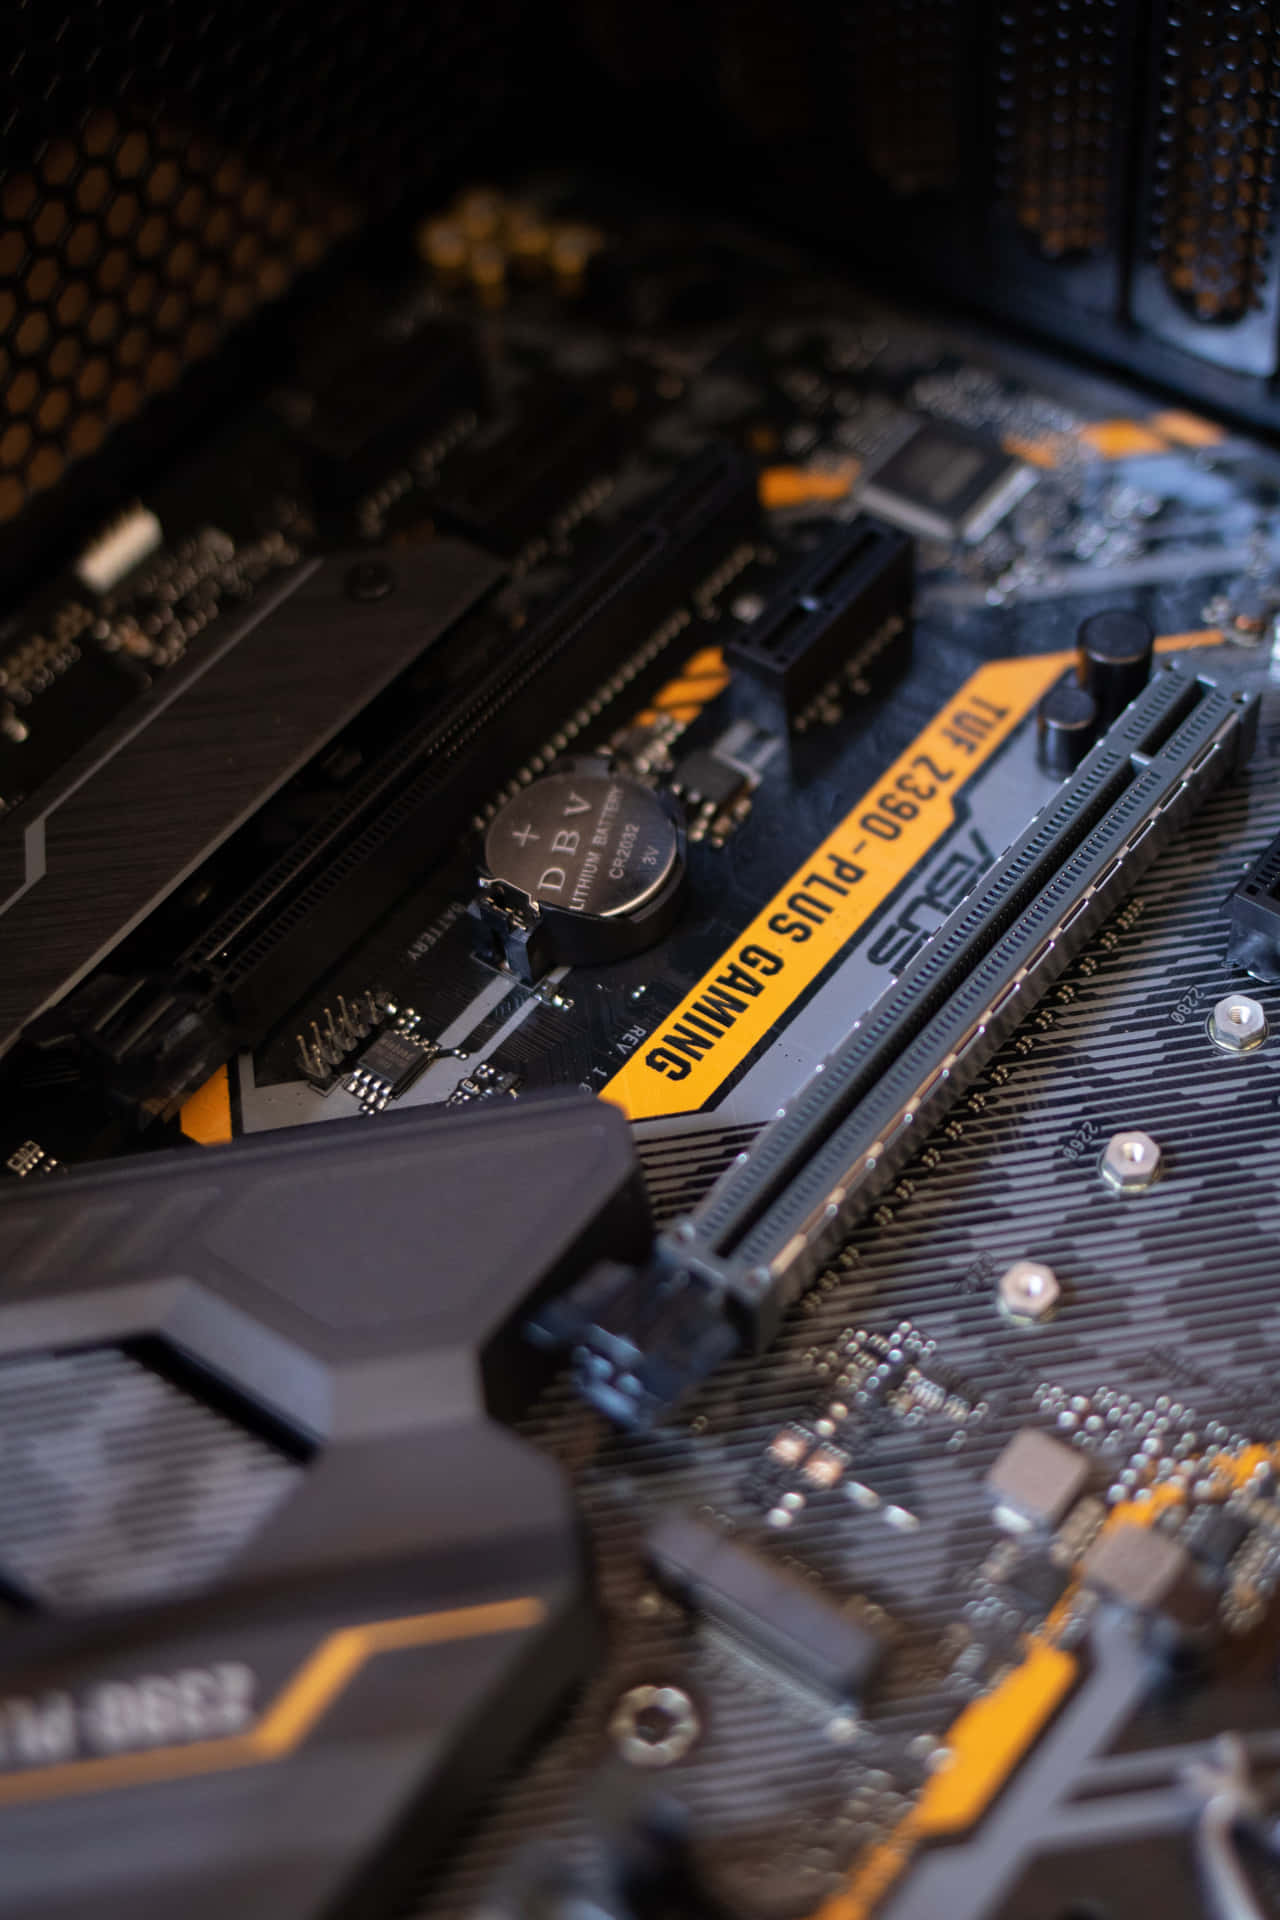 A Close Up Of A Motherboard With A Yellow And Black Motherboard